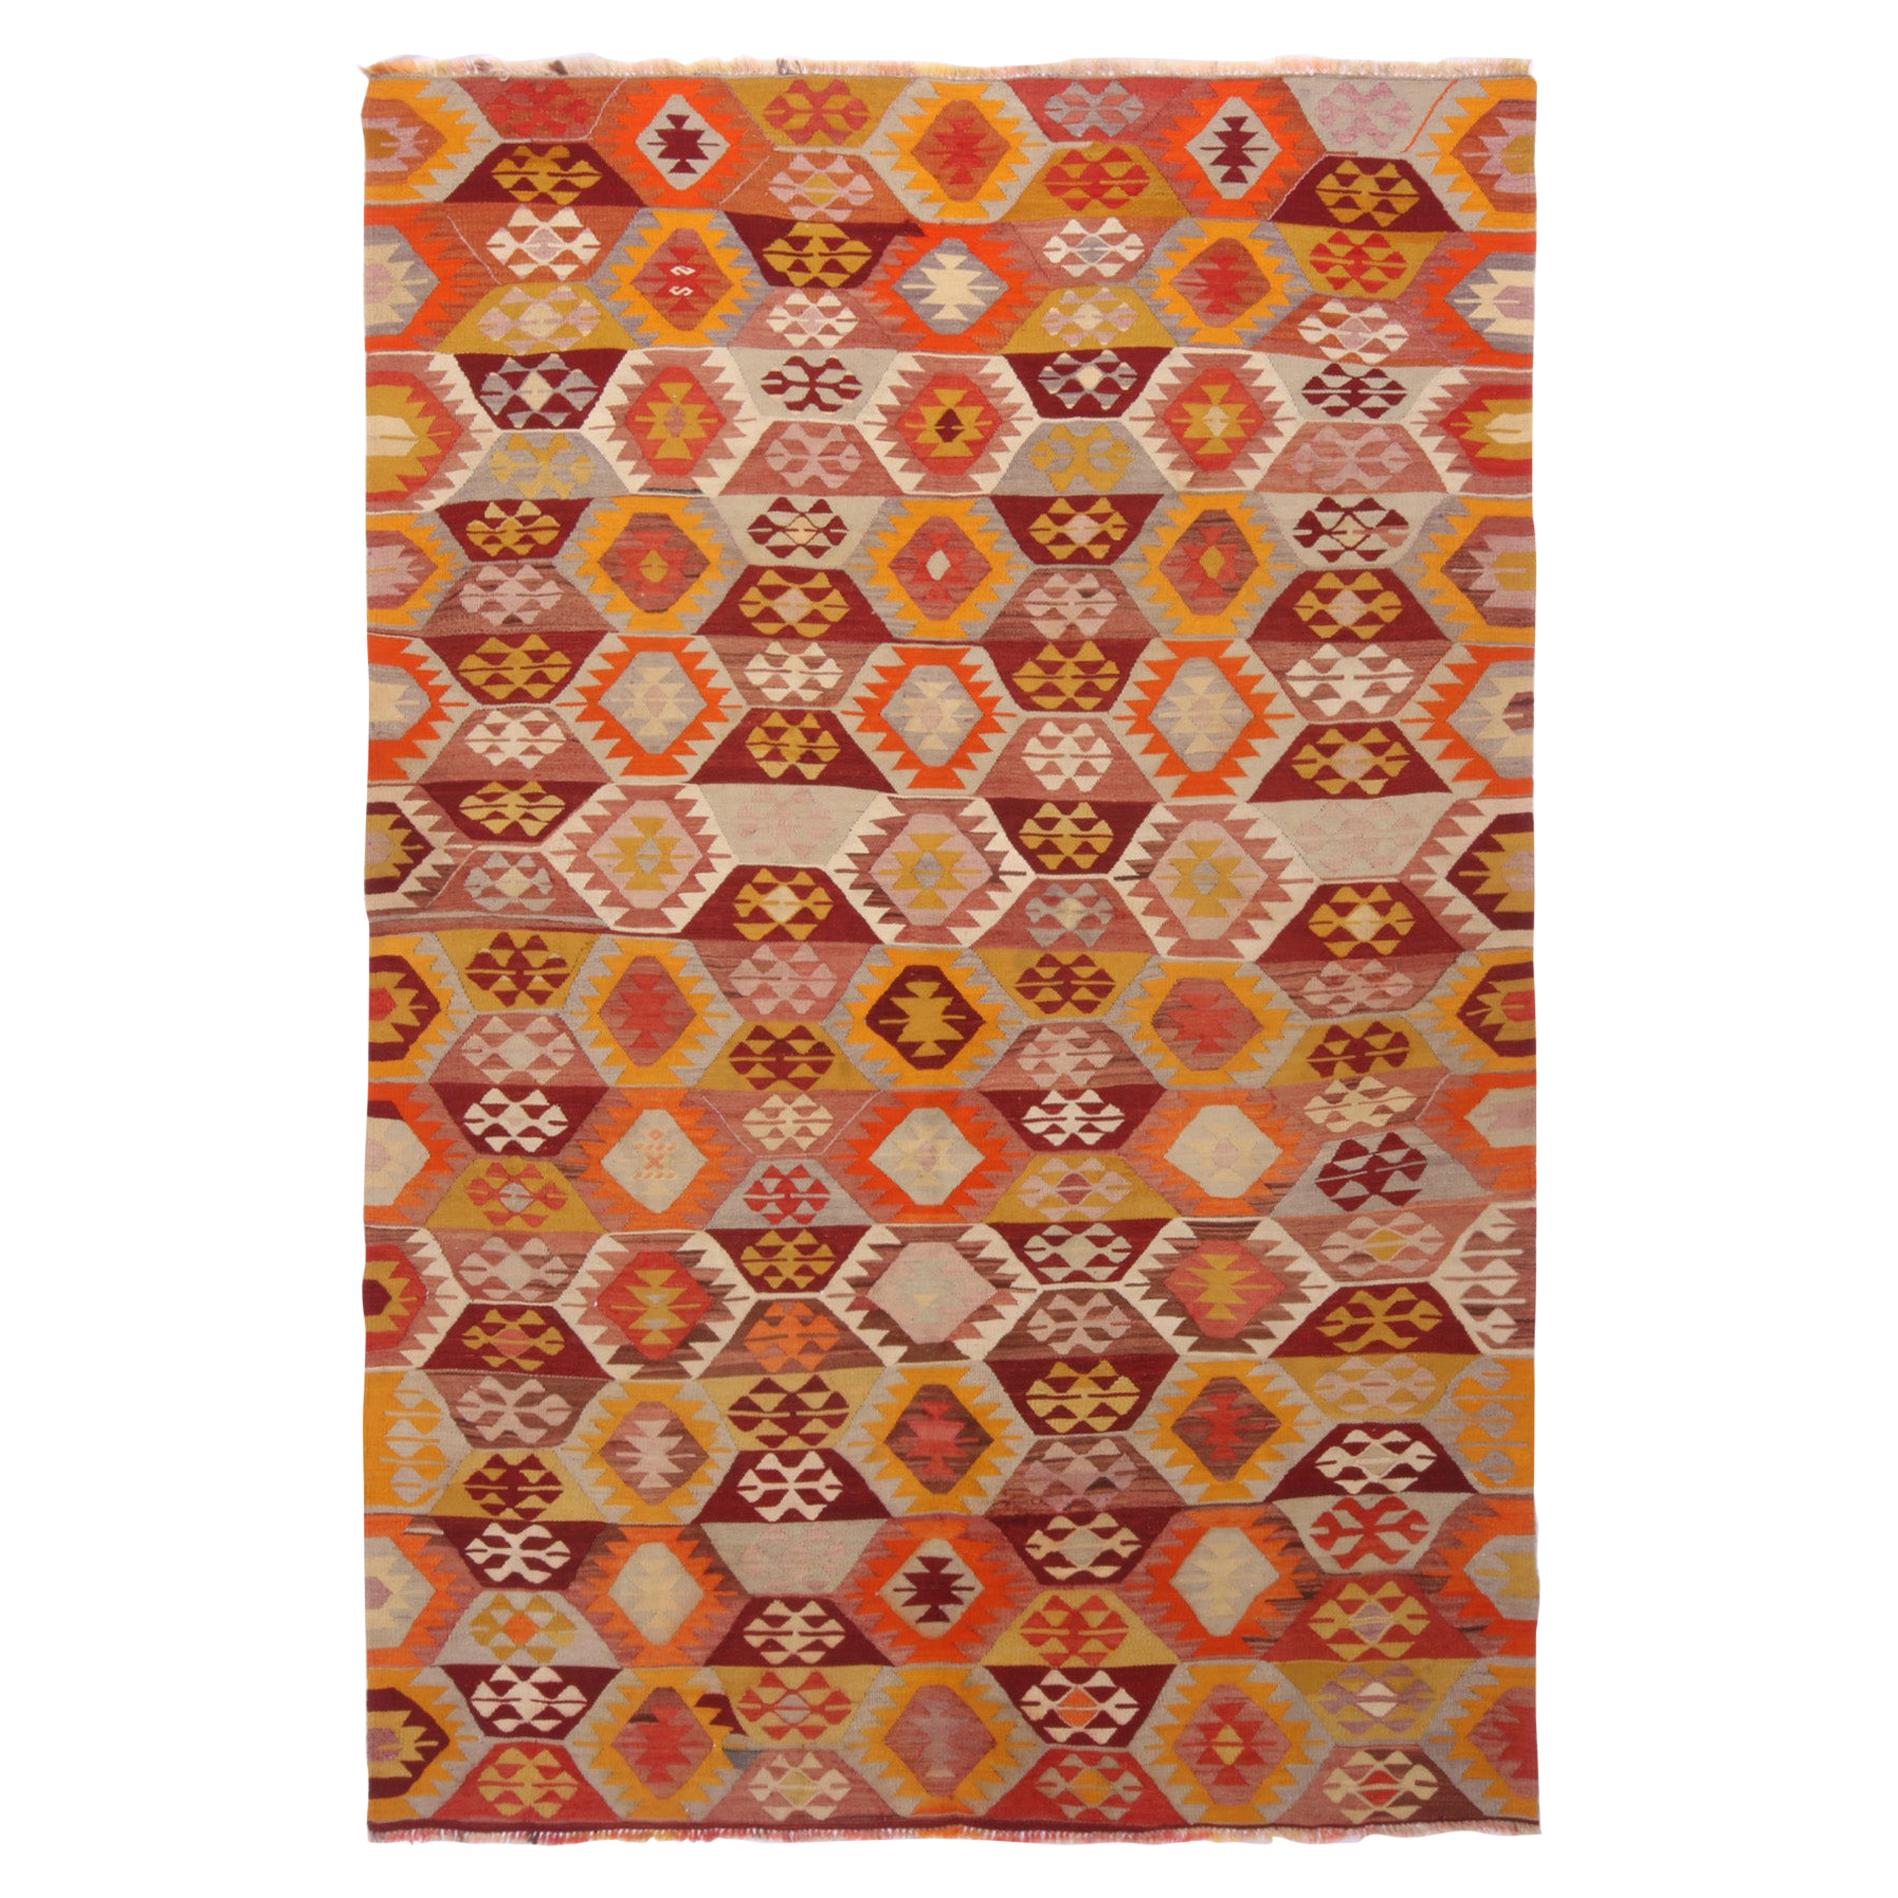 Geometric Gold-Yellow and Blue Wool Kilim Rug with Orange Accent by Rug & Kilim